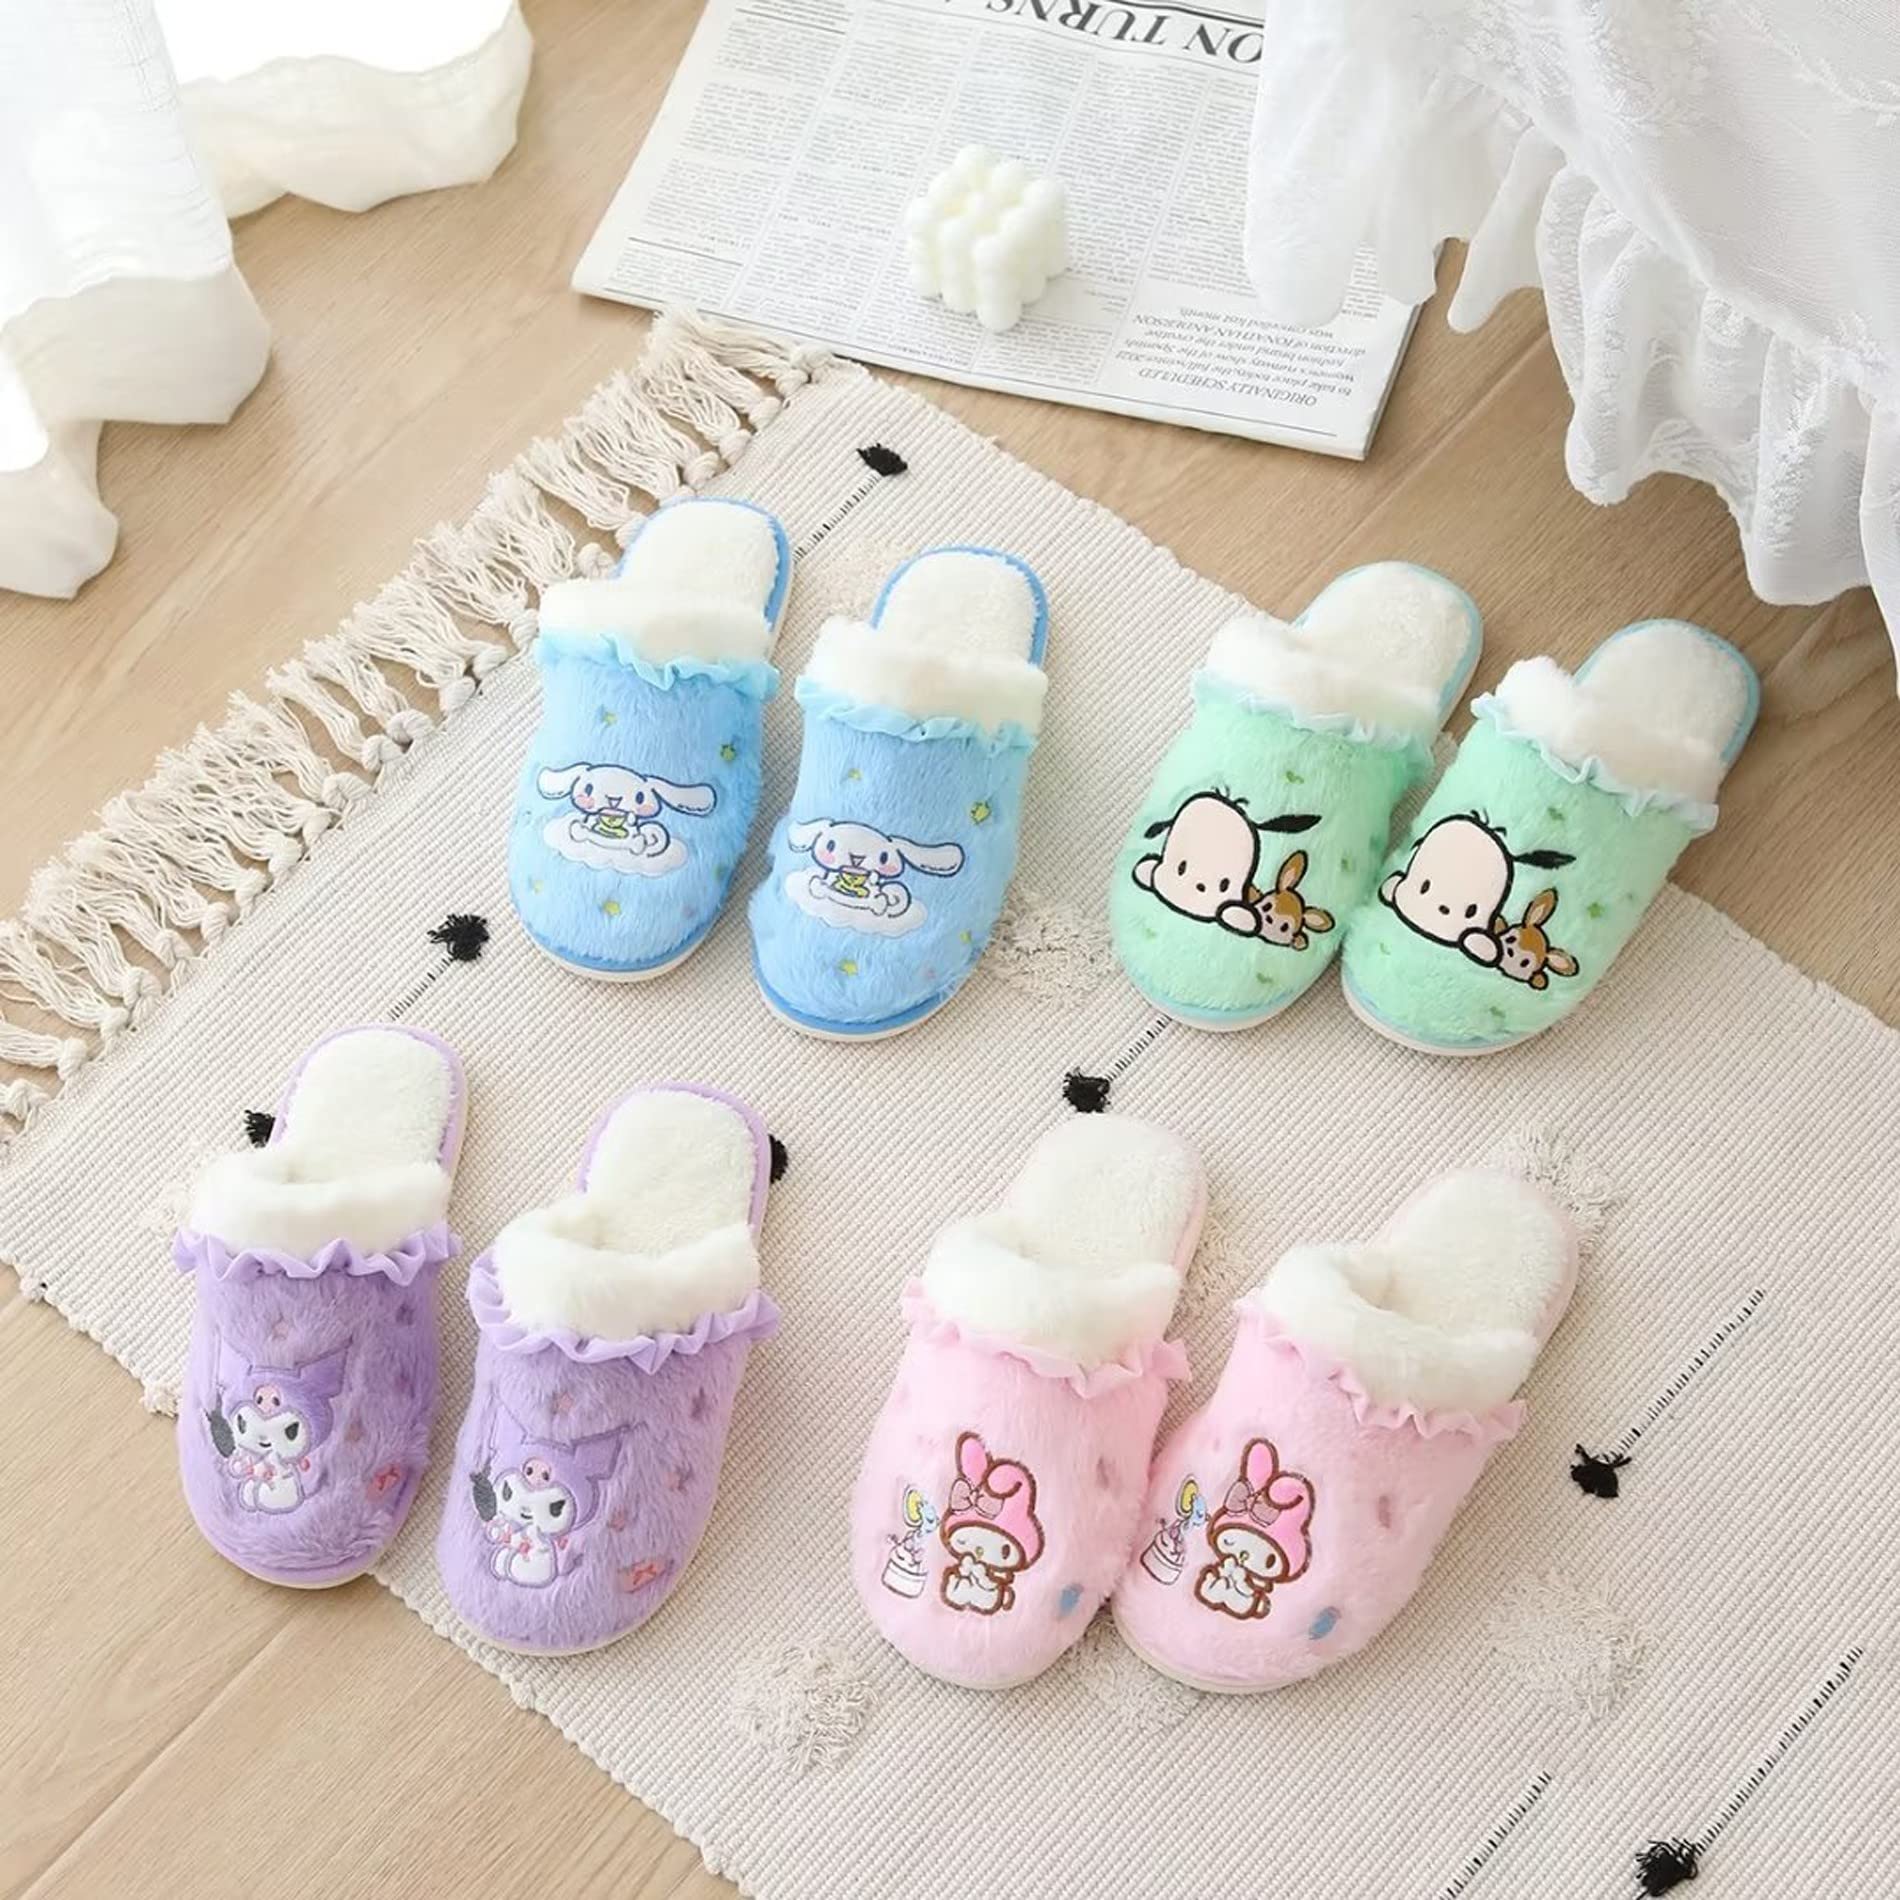 Roffatide Anime Cute Plush Open Back Floor Slippers Indoor Shoes Fuzzy Slippers with Rubber Sole for Women